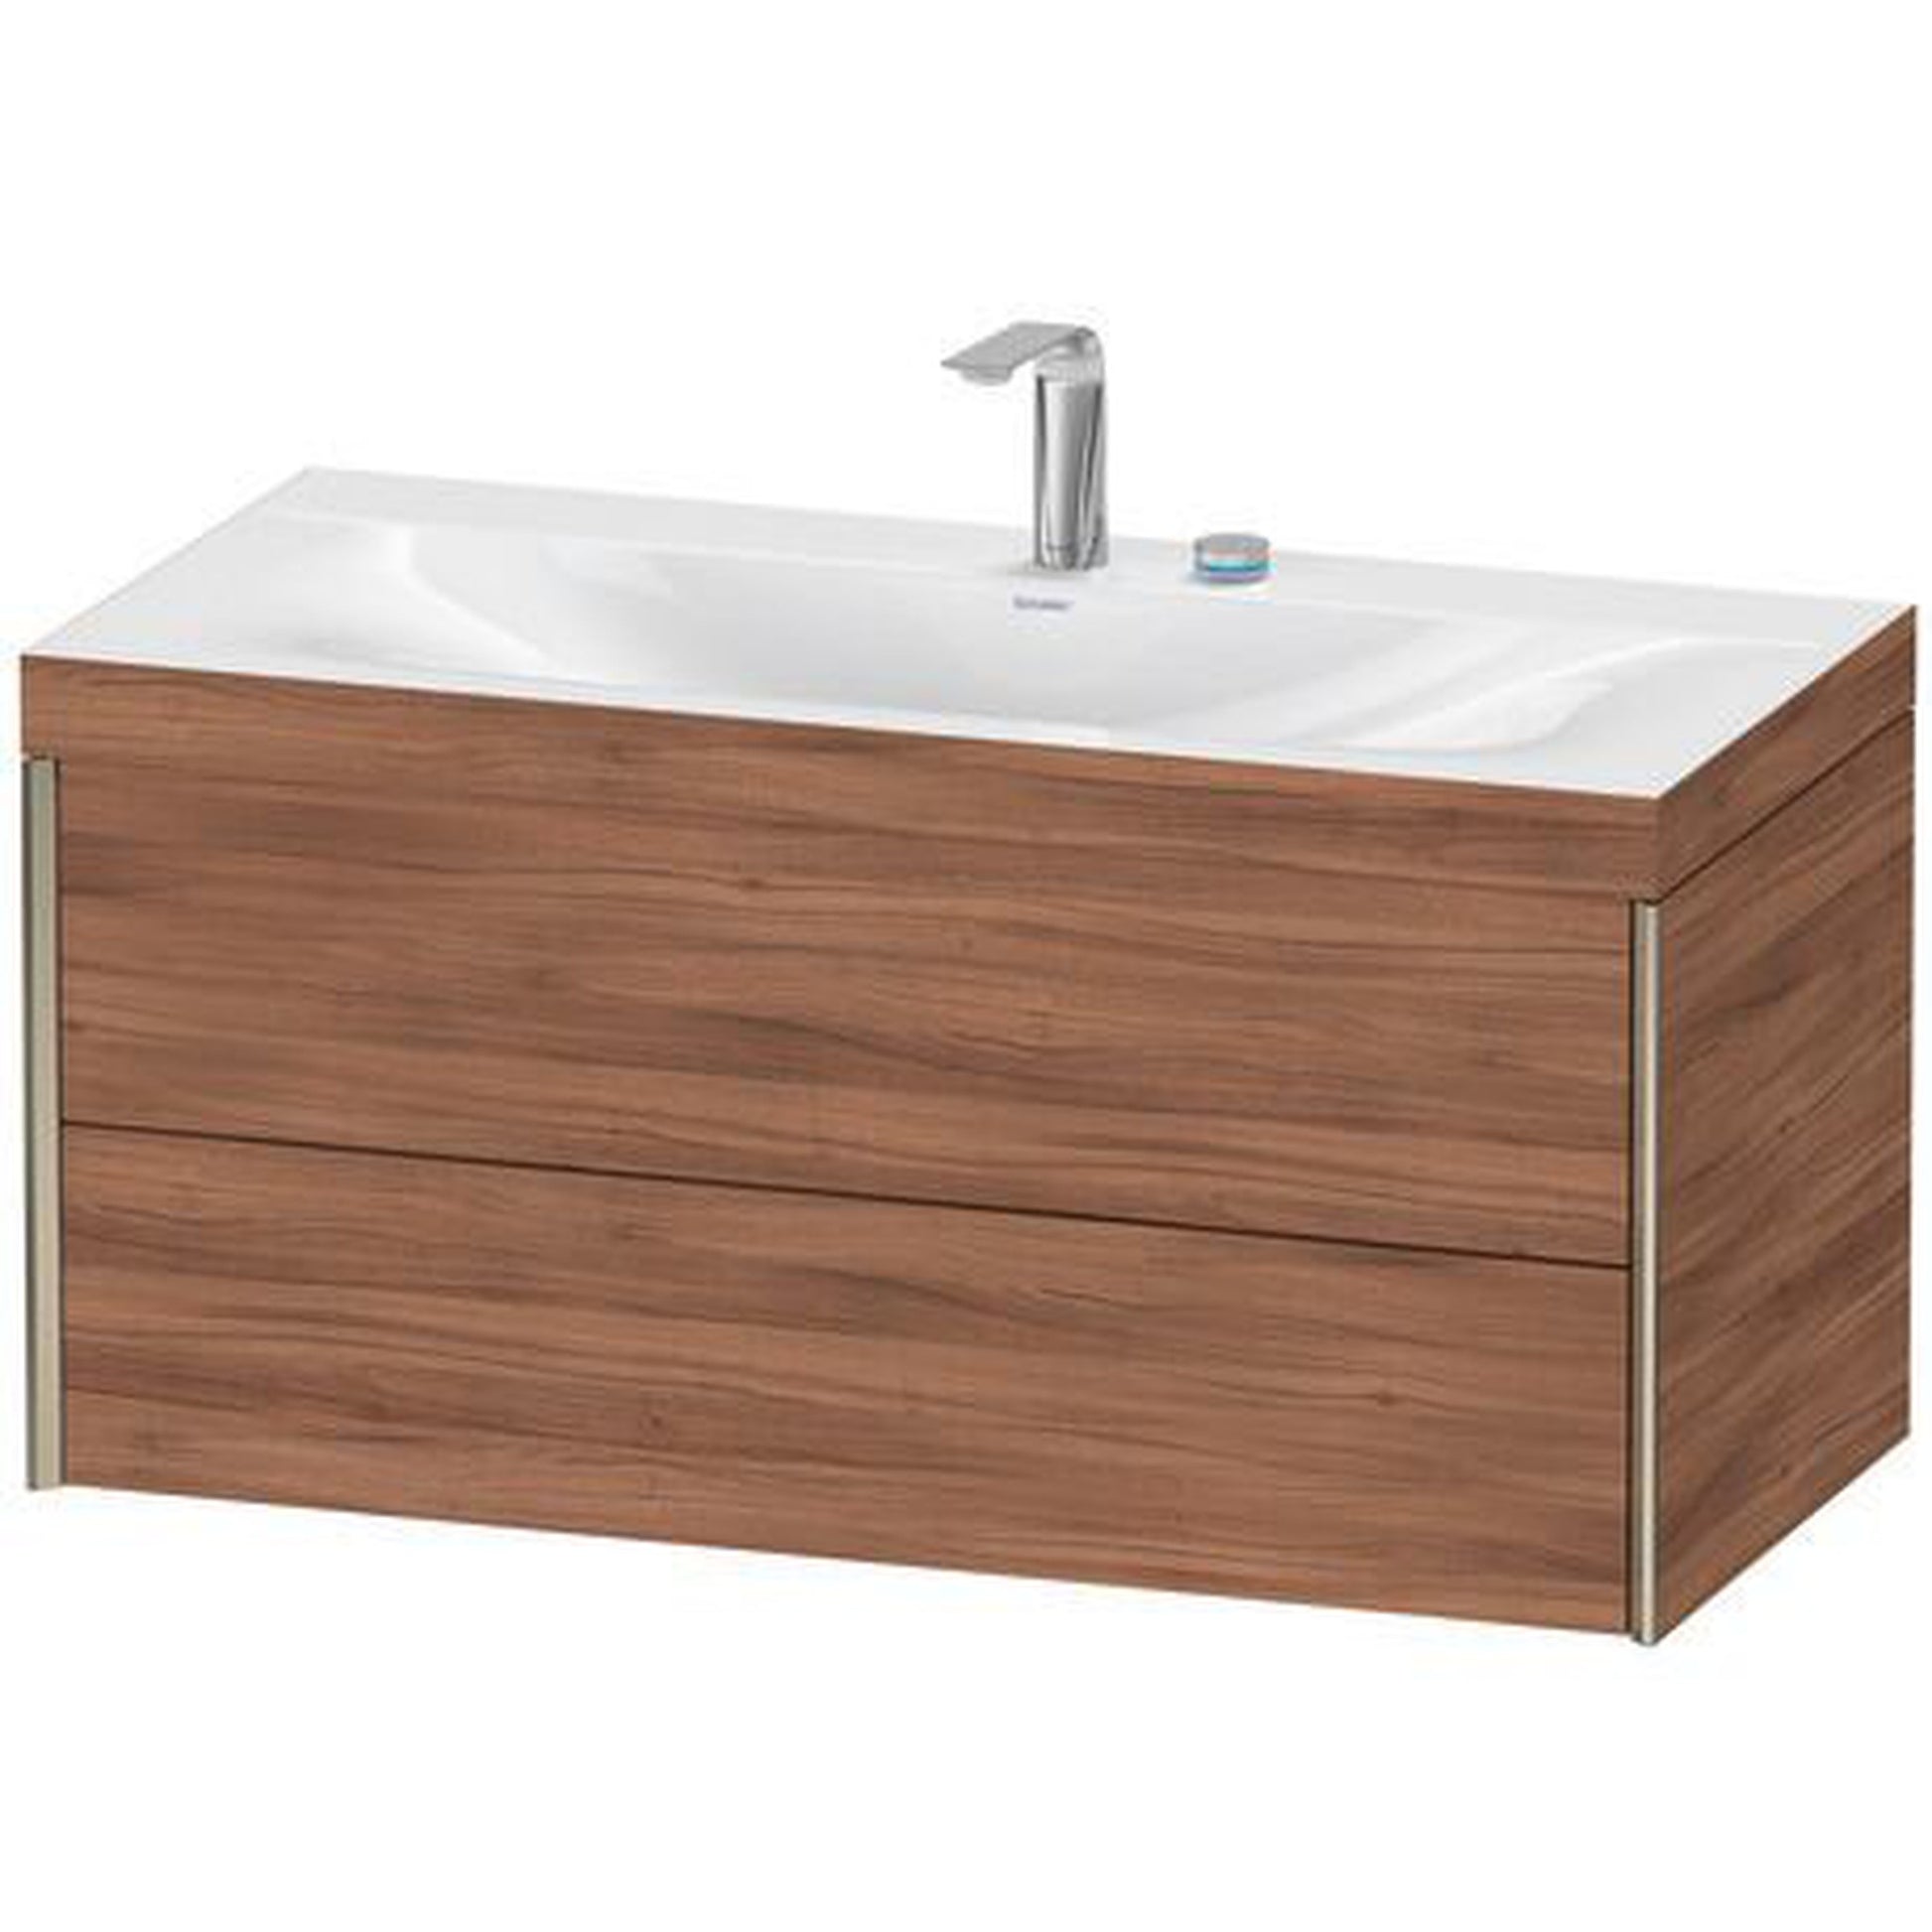 Duravit Xviu 39" x 20" x 19" Two Drawer C-Bonded Wall-Mount Vanity Kit With Two Tap Holes, Walnut (XV4616EB179C)